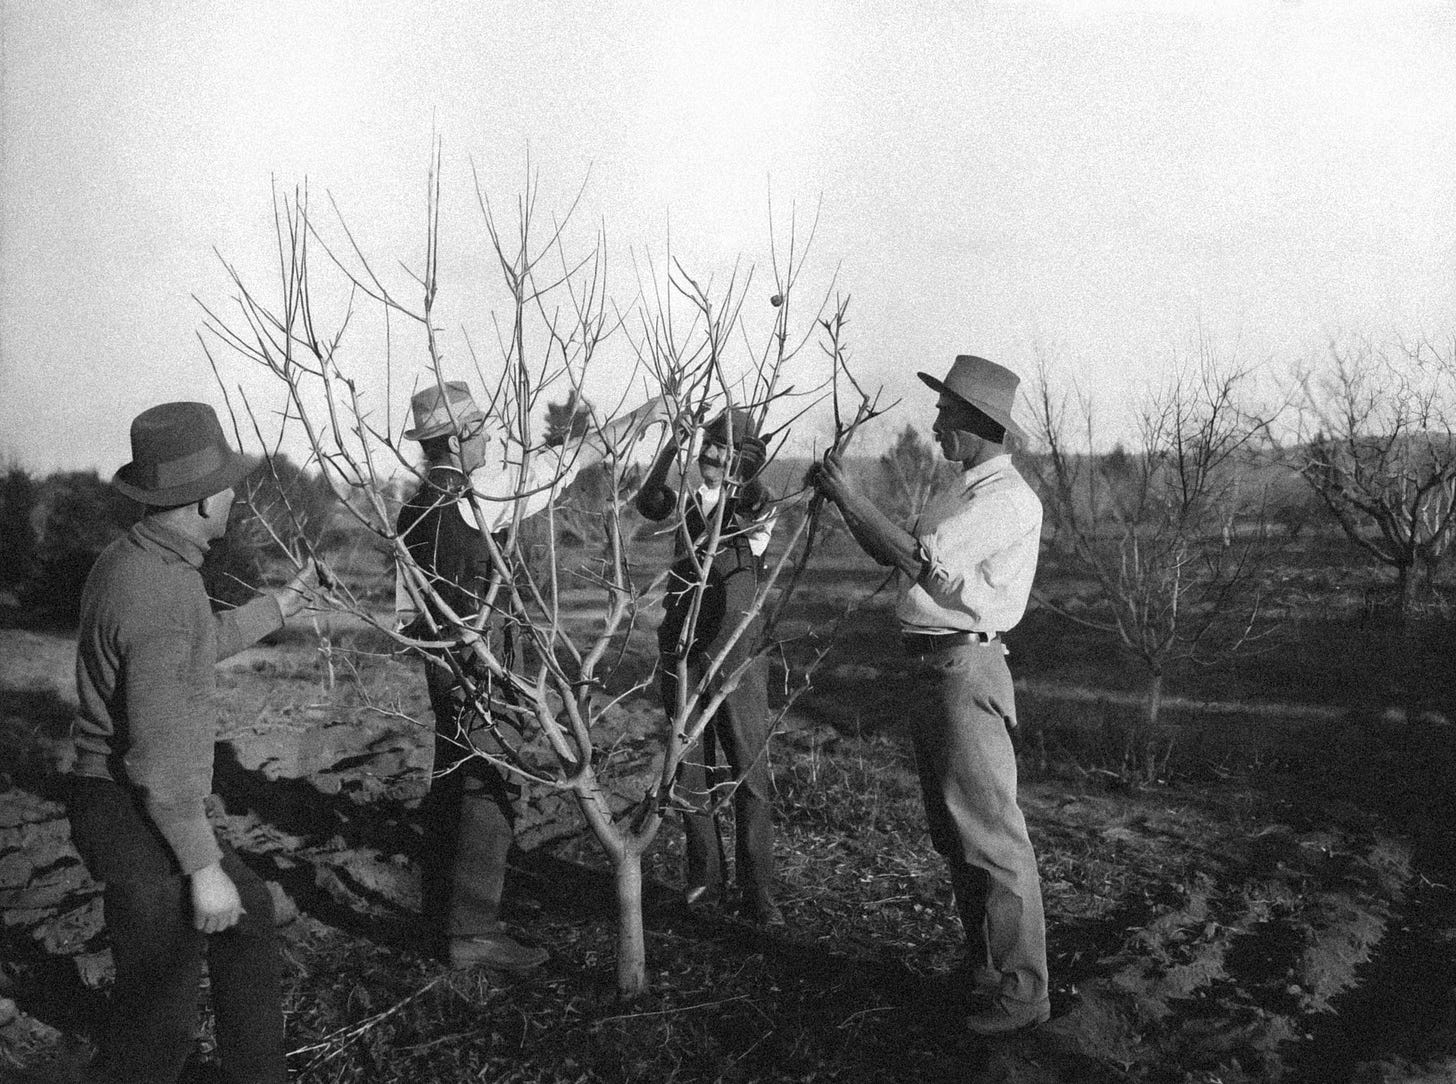 black and white picture of four men standing around a fruit tree with bare branches. photo is from 1921 historical collection. one man demonstrates how to prune the tree while three watch.